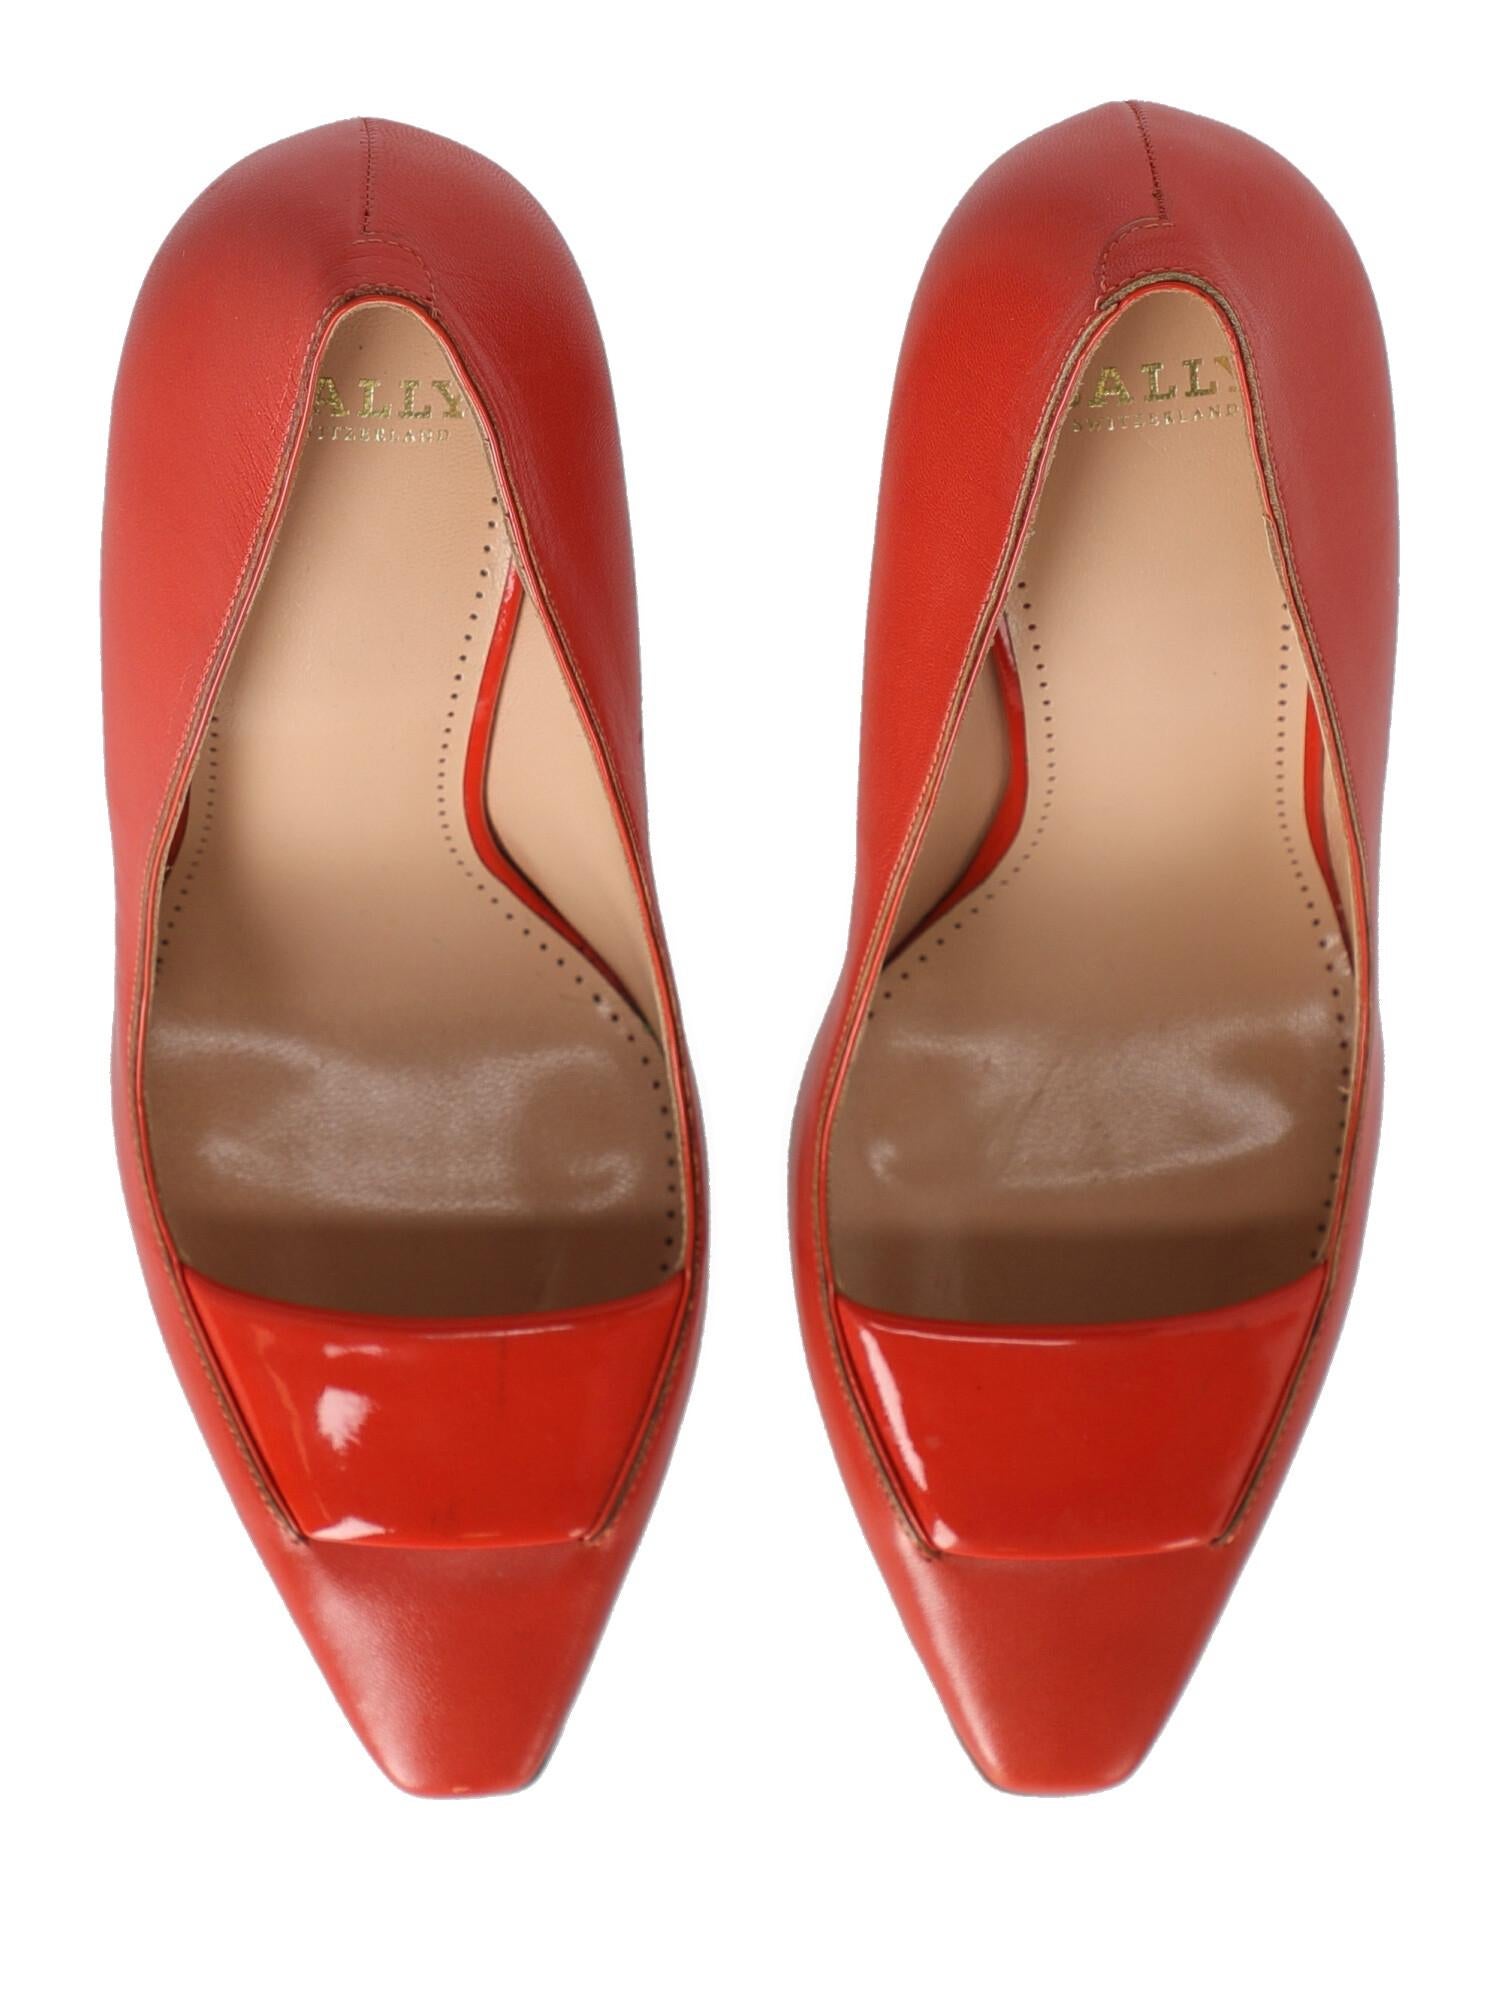 Bally Woman Pumps Orange Leather IT 40 For Sale 1